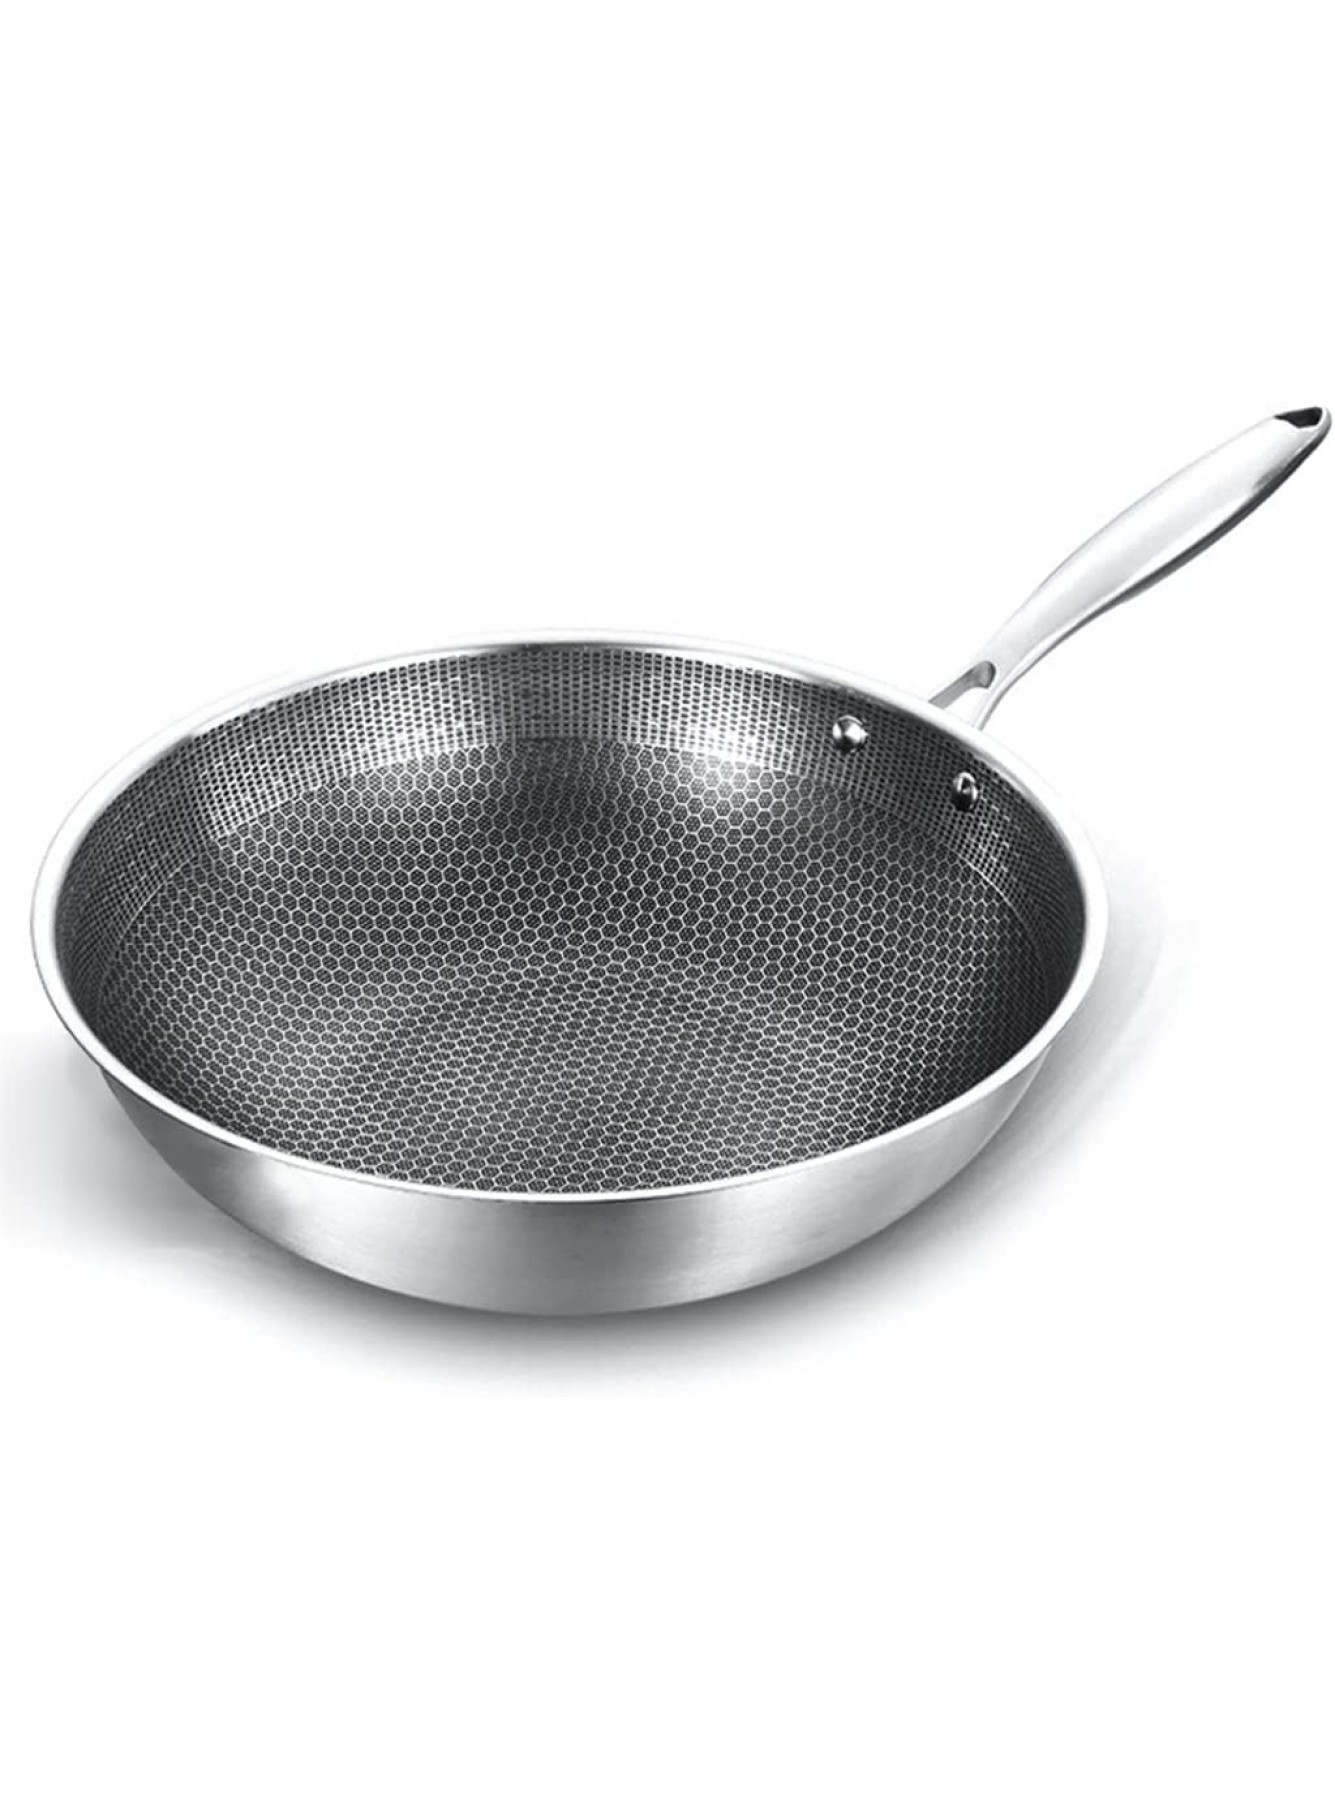 N A Uncoated Wok,Non-Stick pan,Stainless Steel,Honeycomb Design,Uniform Heating,for Electric Induction and Gas Stoves Color : A Size : 32cm B0B469WP8G